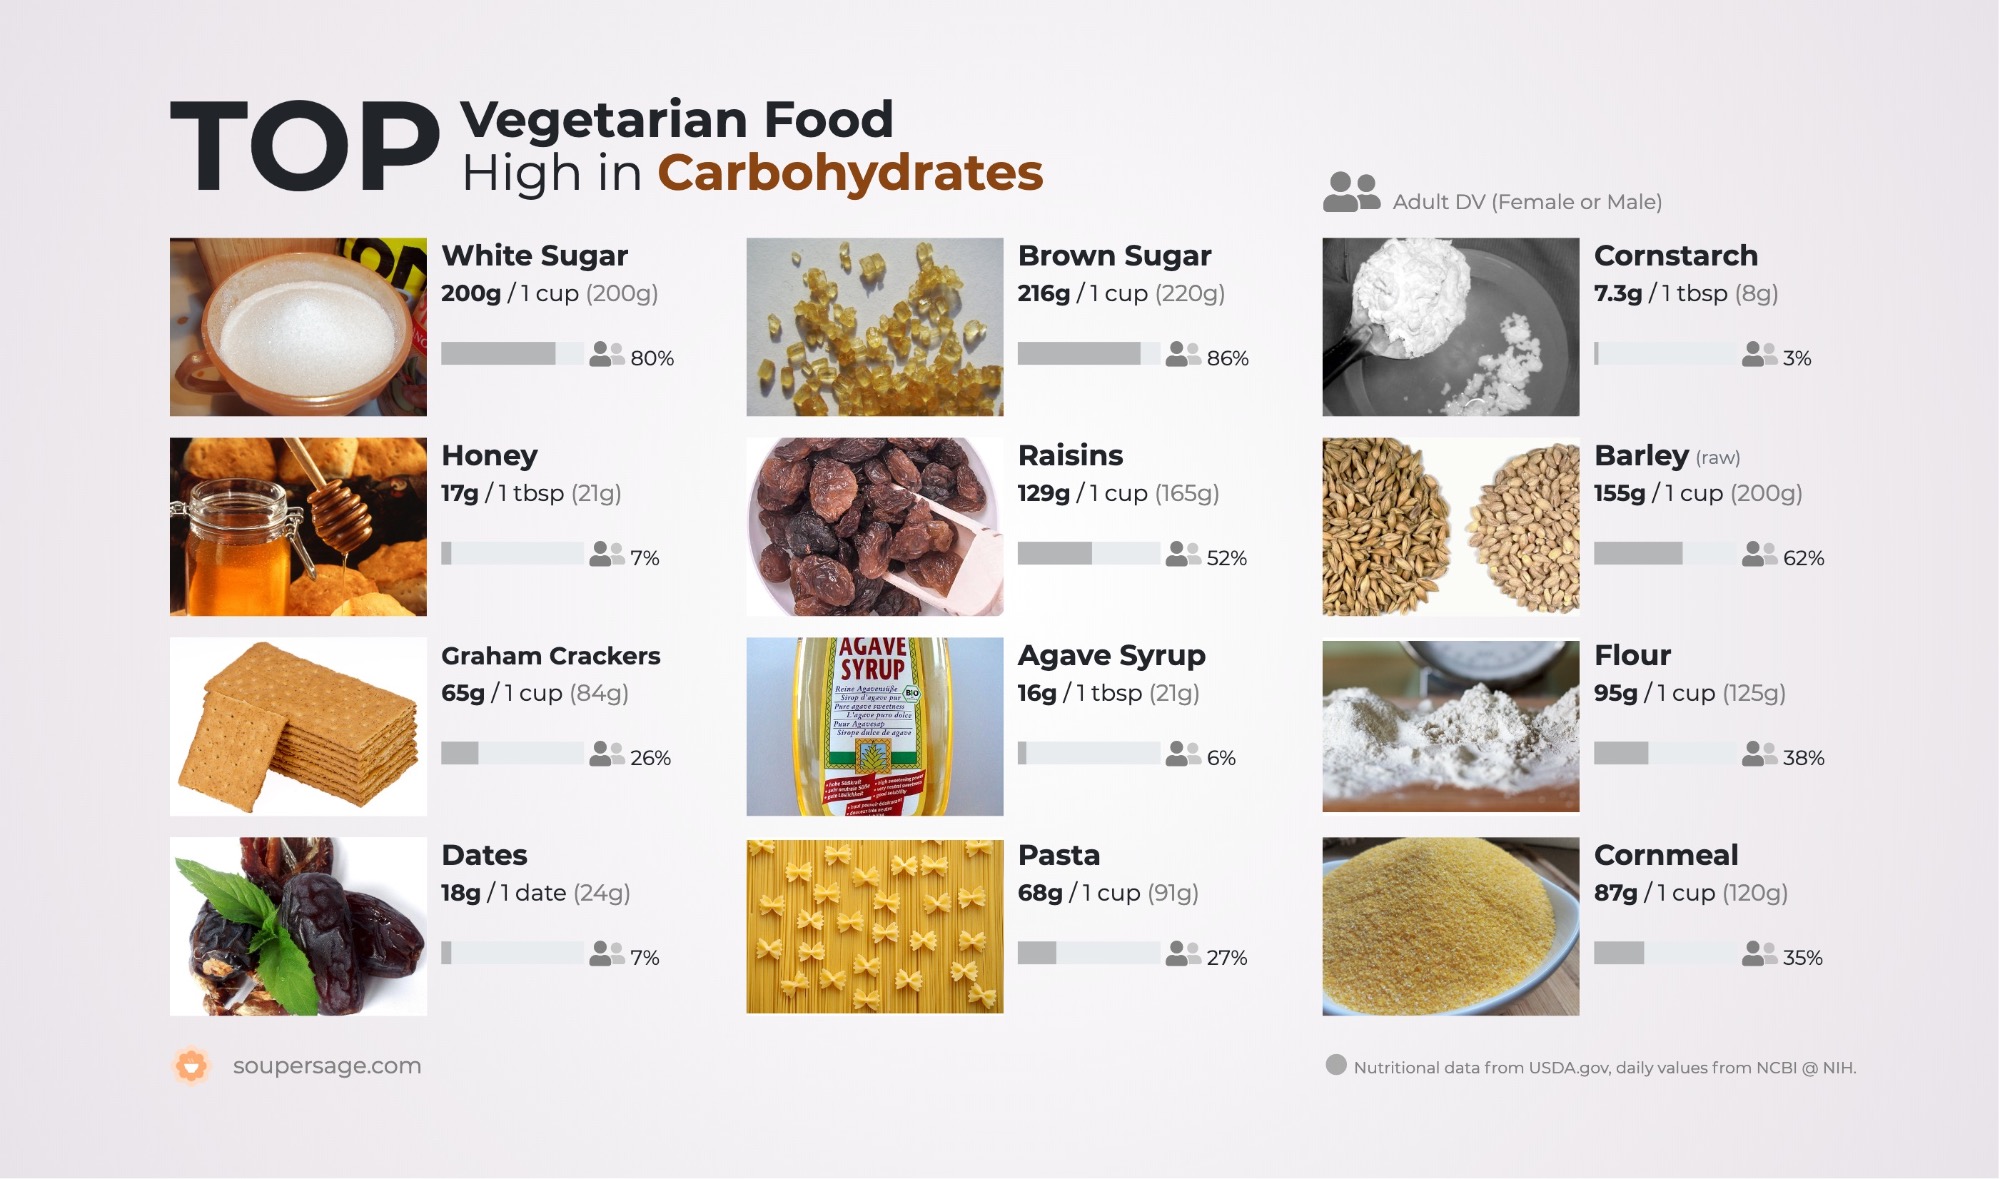 image of Top Vegetarian Food High in Carbohydrates